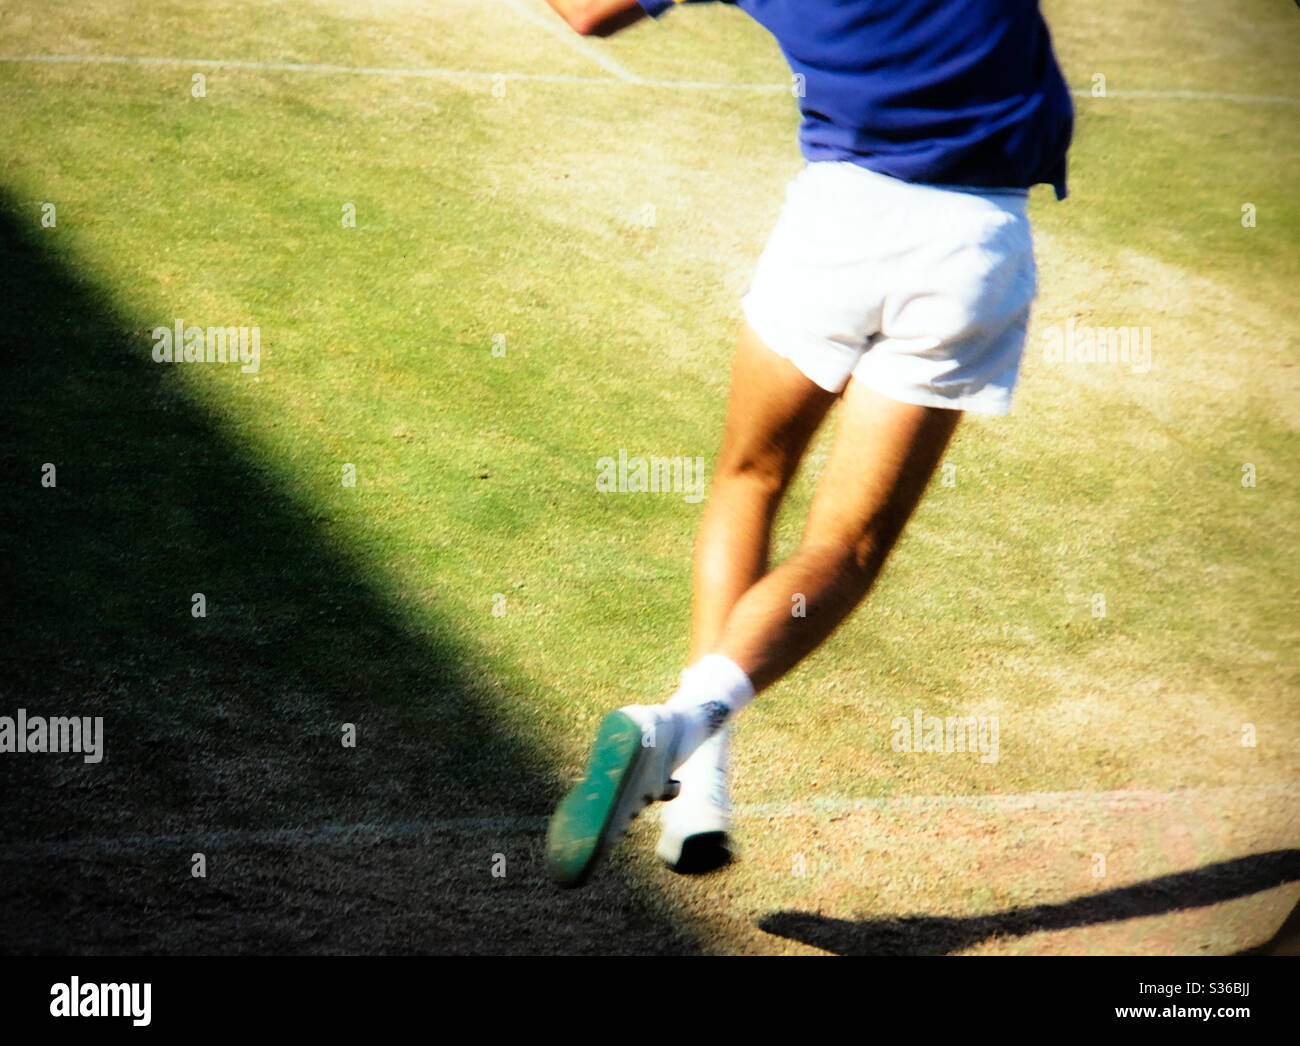 Wimbledon tennis championships player leaping in the air off the grass dreamy mood Stock Photo